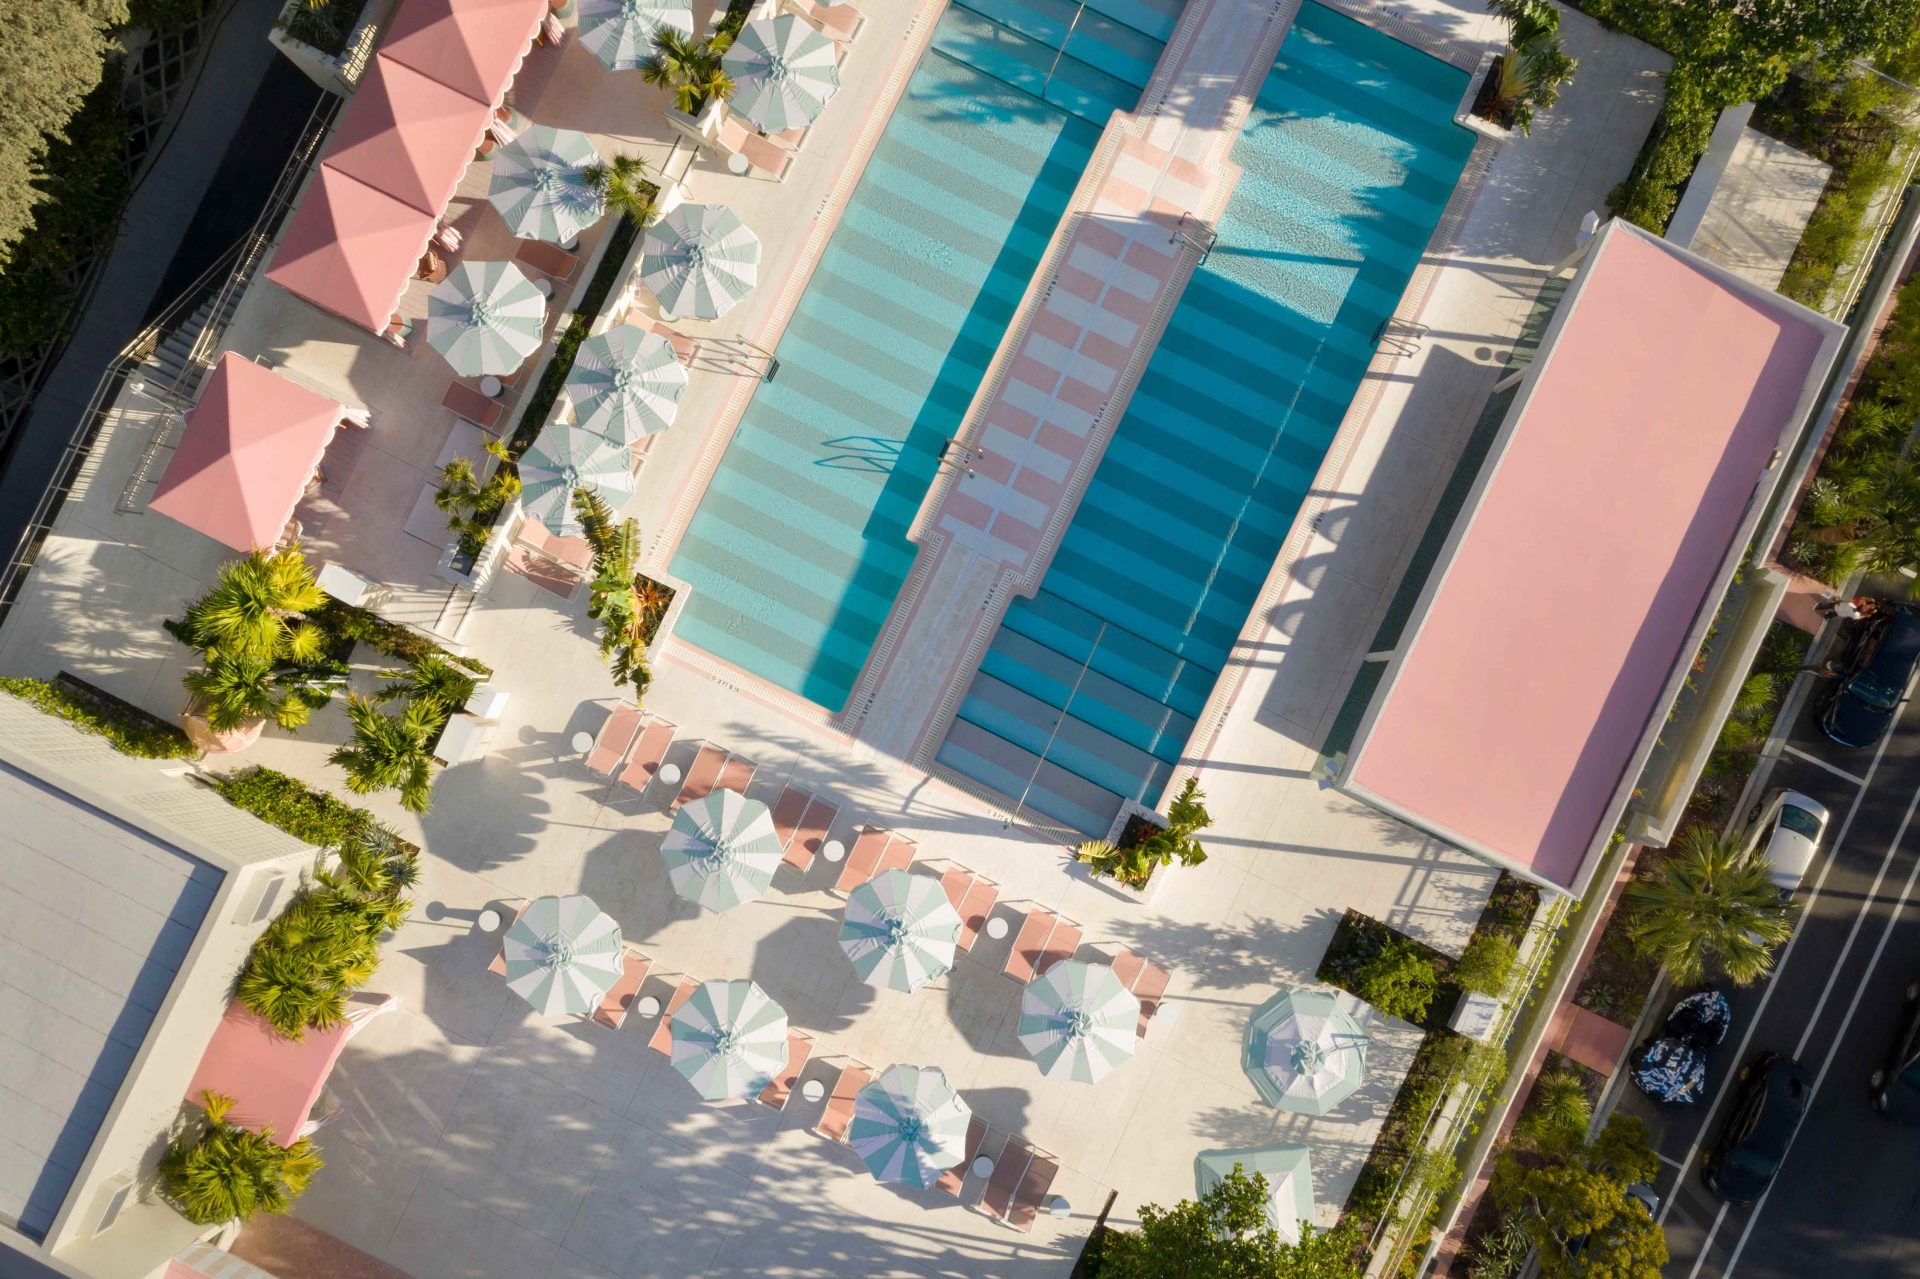 Ariel shot os Strawberry Moon pool in Miami — twin pools surrounded by pink buildings.